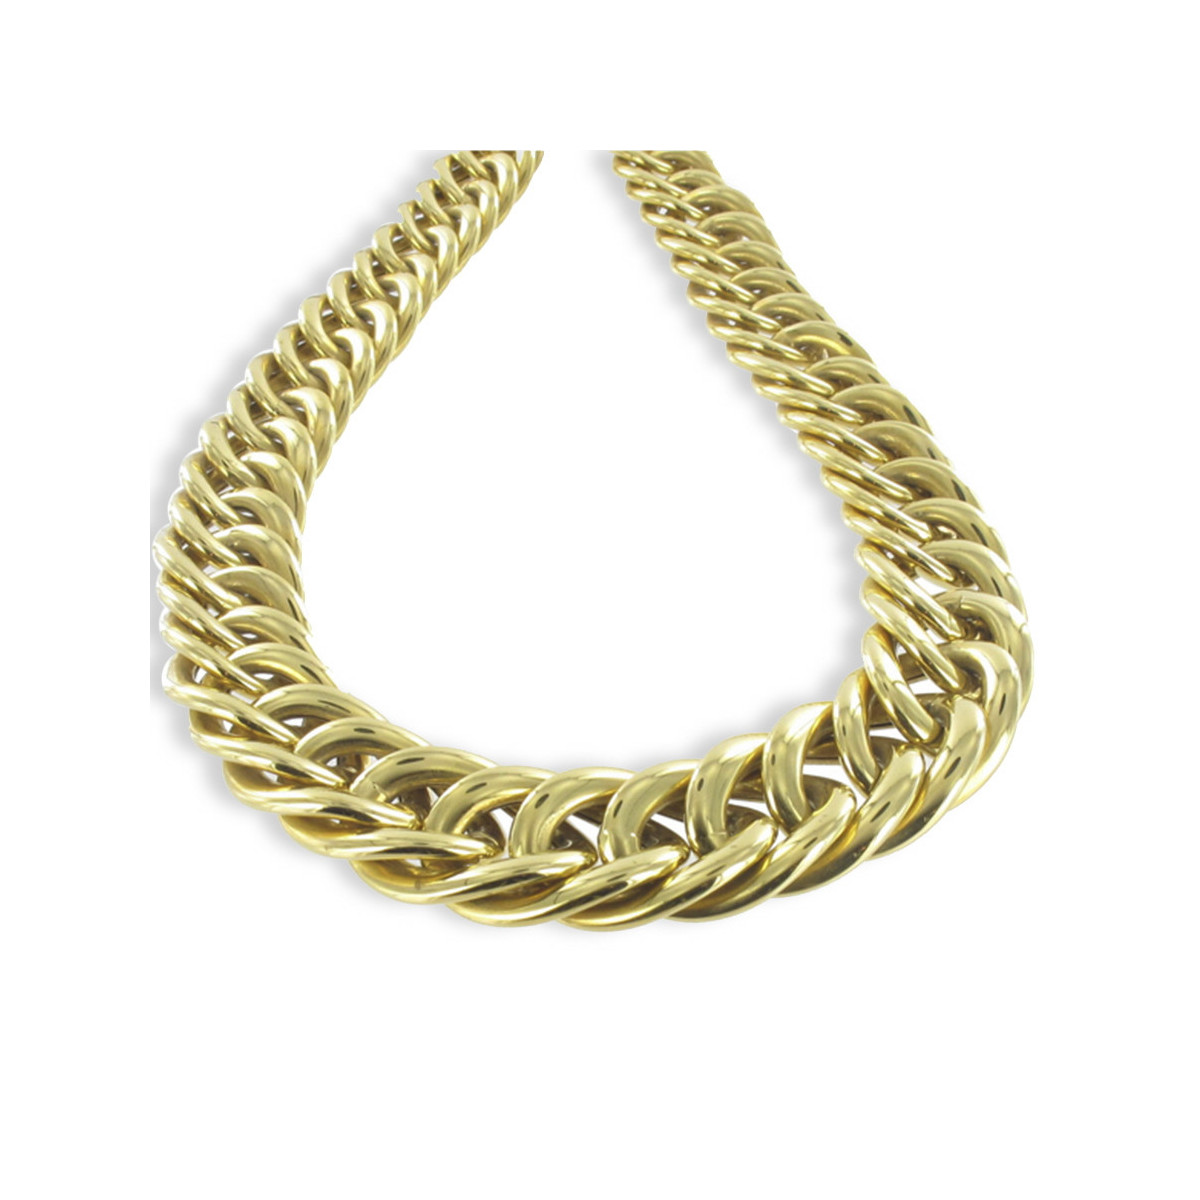 YELLOW GOLD NECKLACE